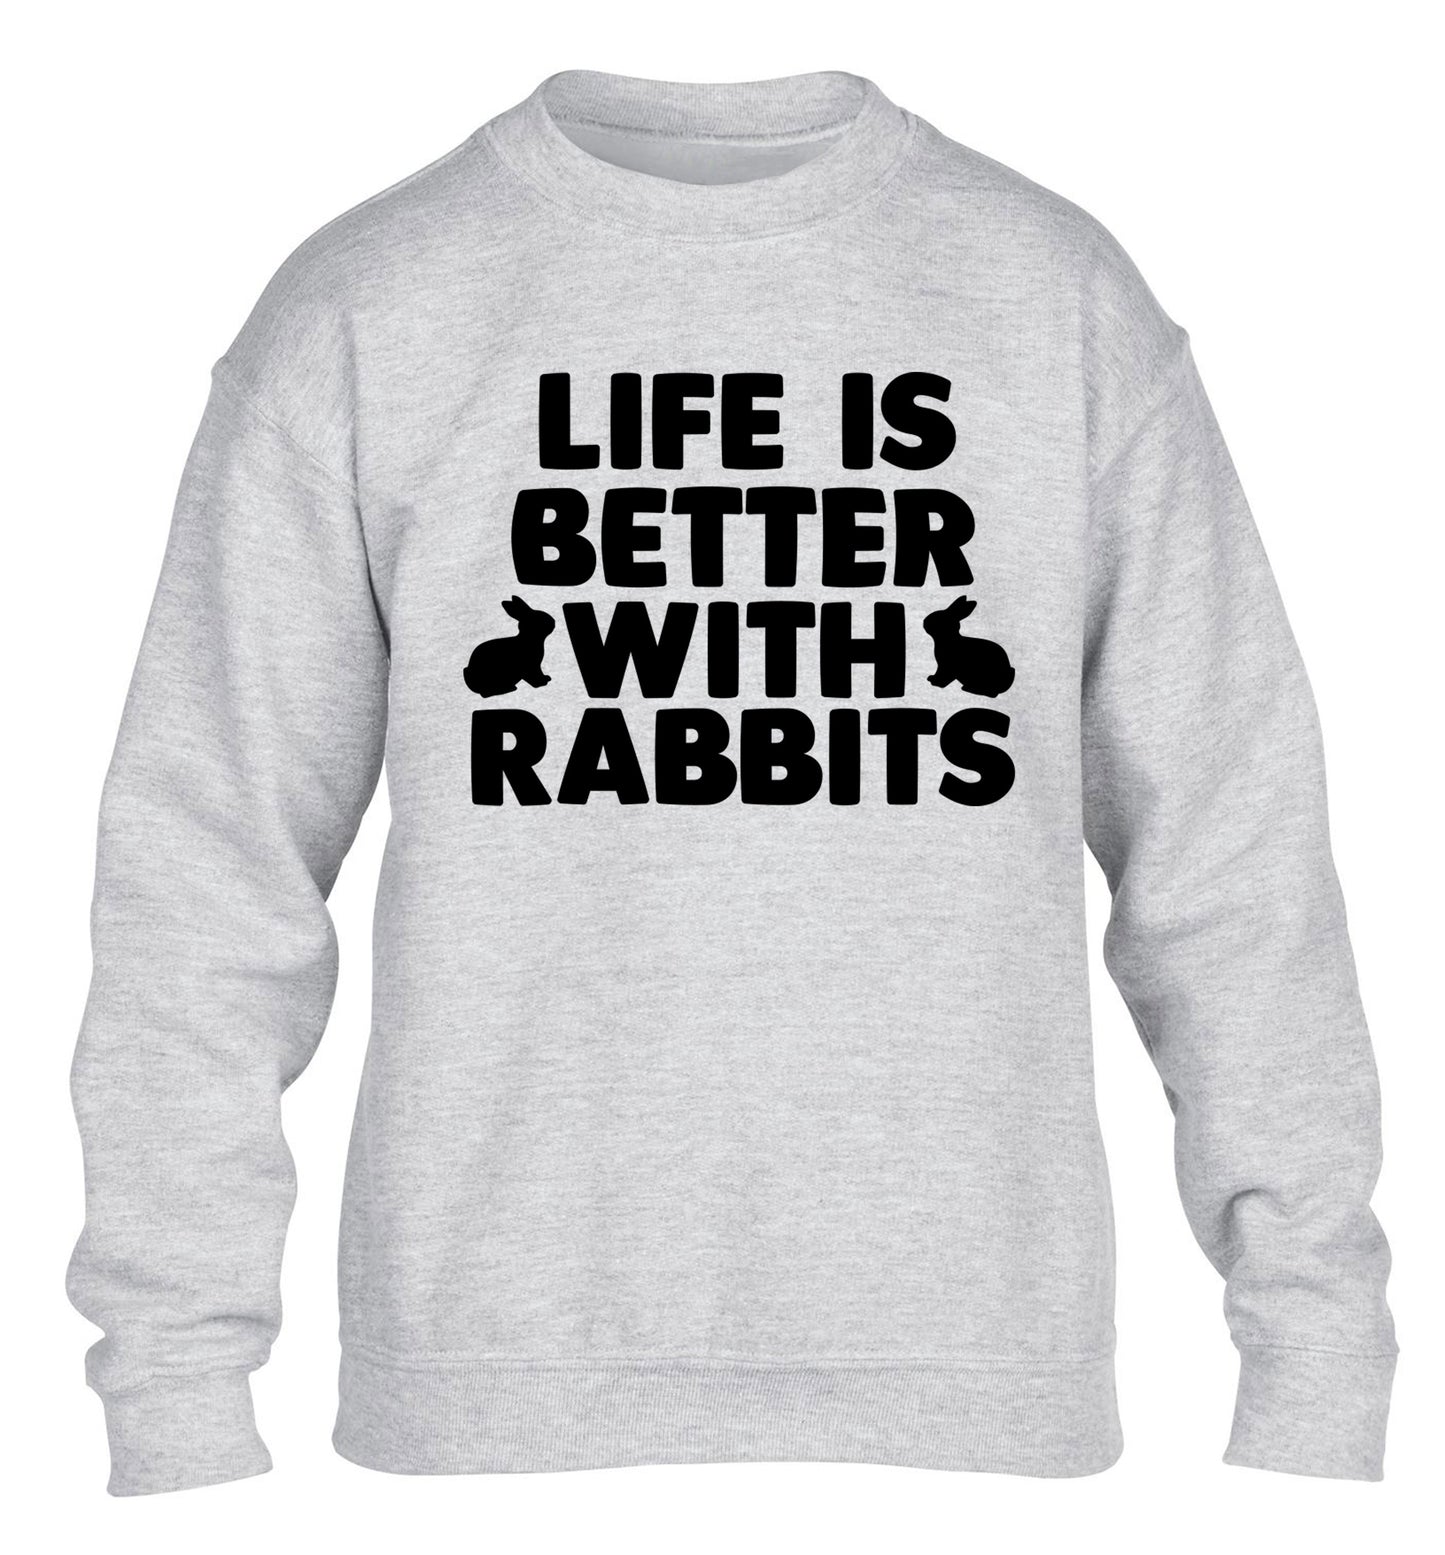 Life is better with rabbits children's grey  sweater 12-14 Years